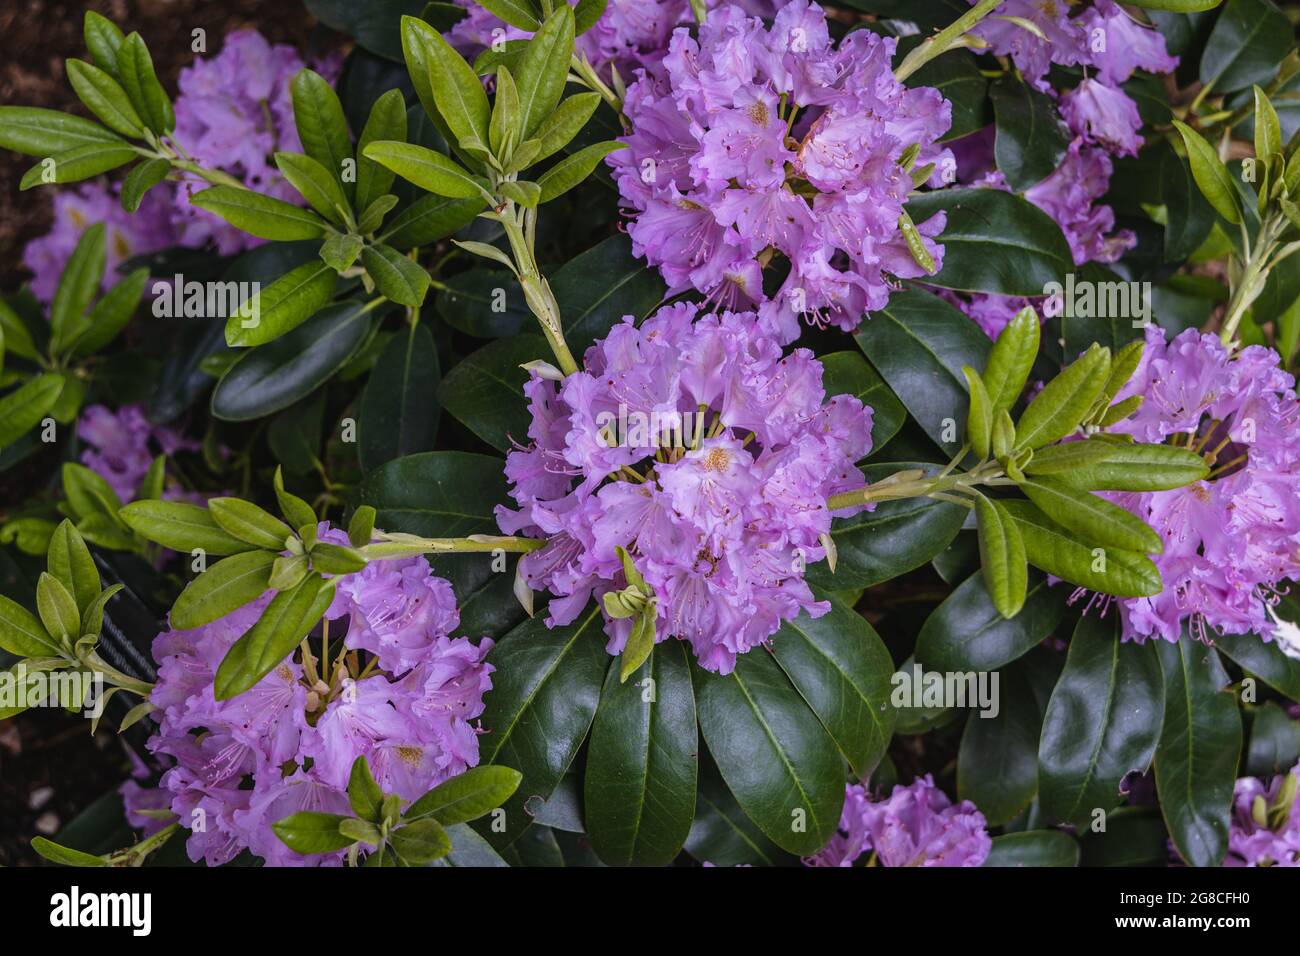 Rhododendron flowers in the garden, variety callled Cunninghams White Stock Photo